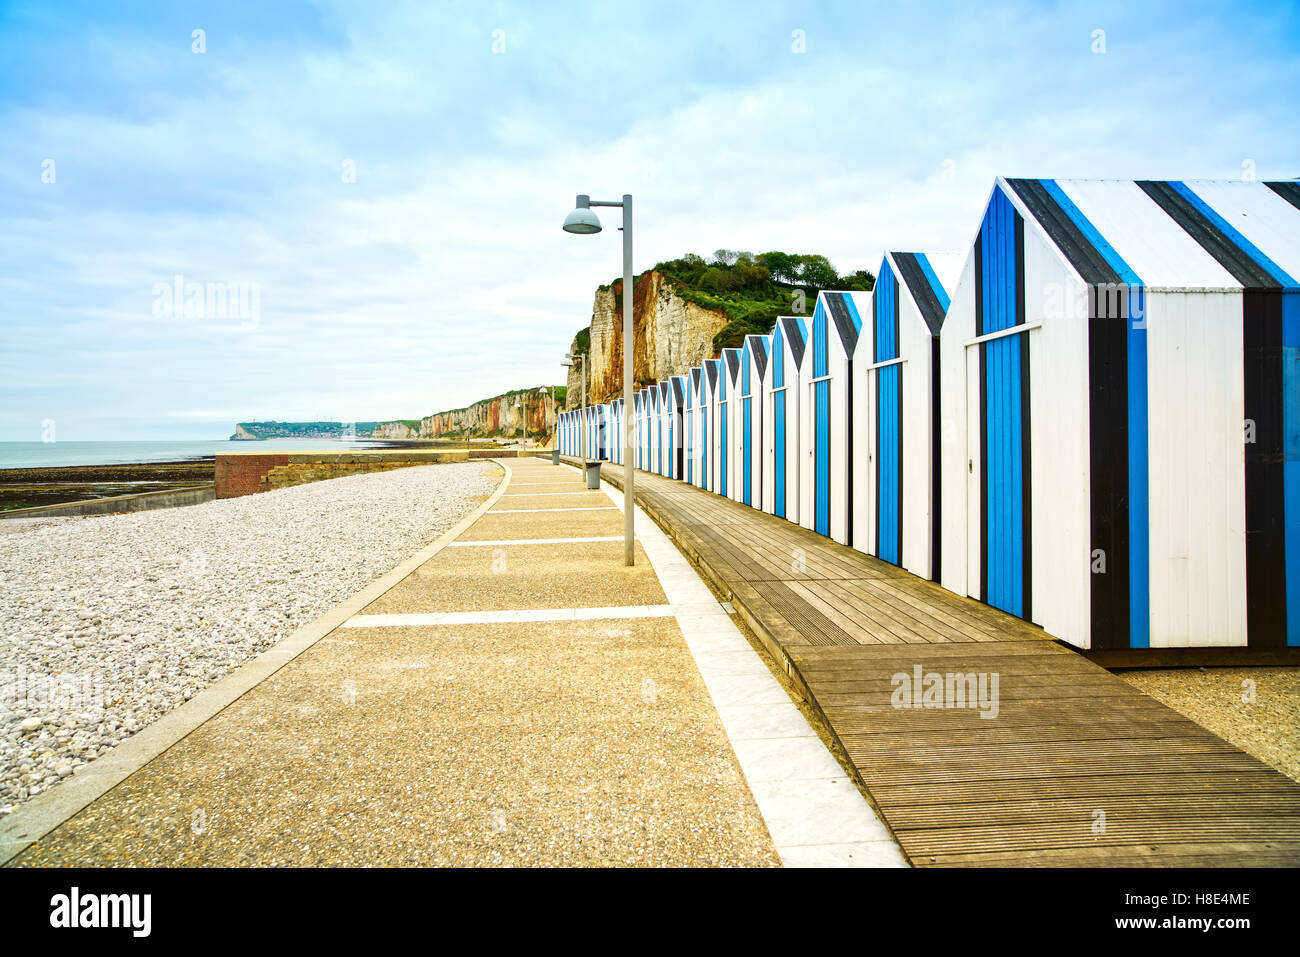 Yport and Fecamp, Normandy. Beach huts or cabins and cliffs in low tide ocean. France, Europe. Stock Photo